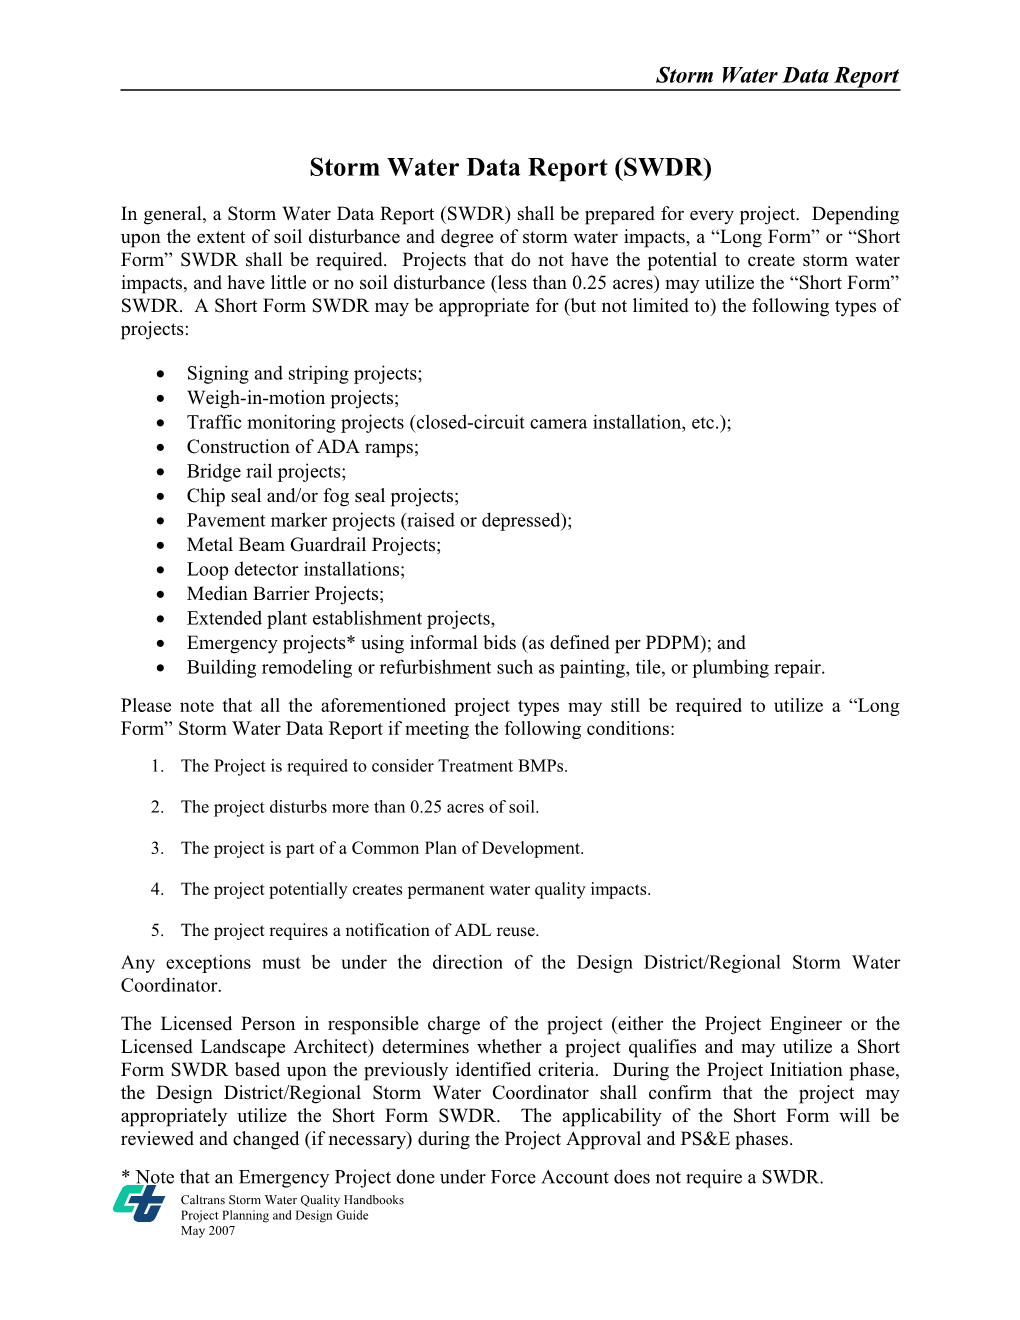 Storm Water Data Report (SWDR)